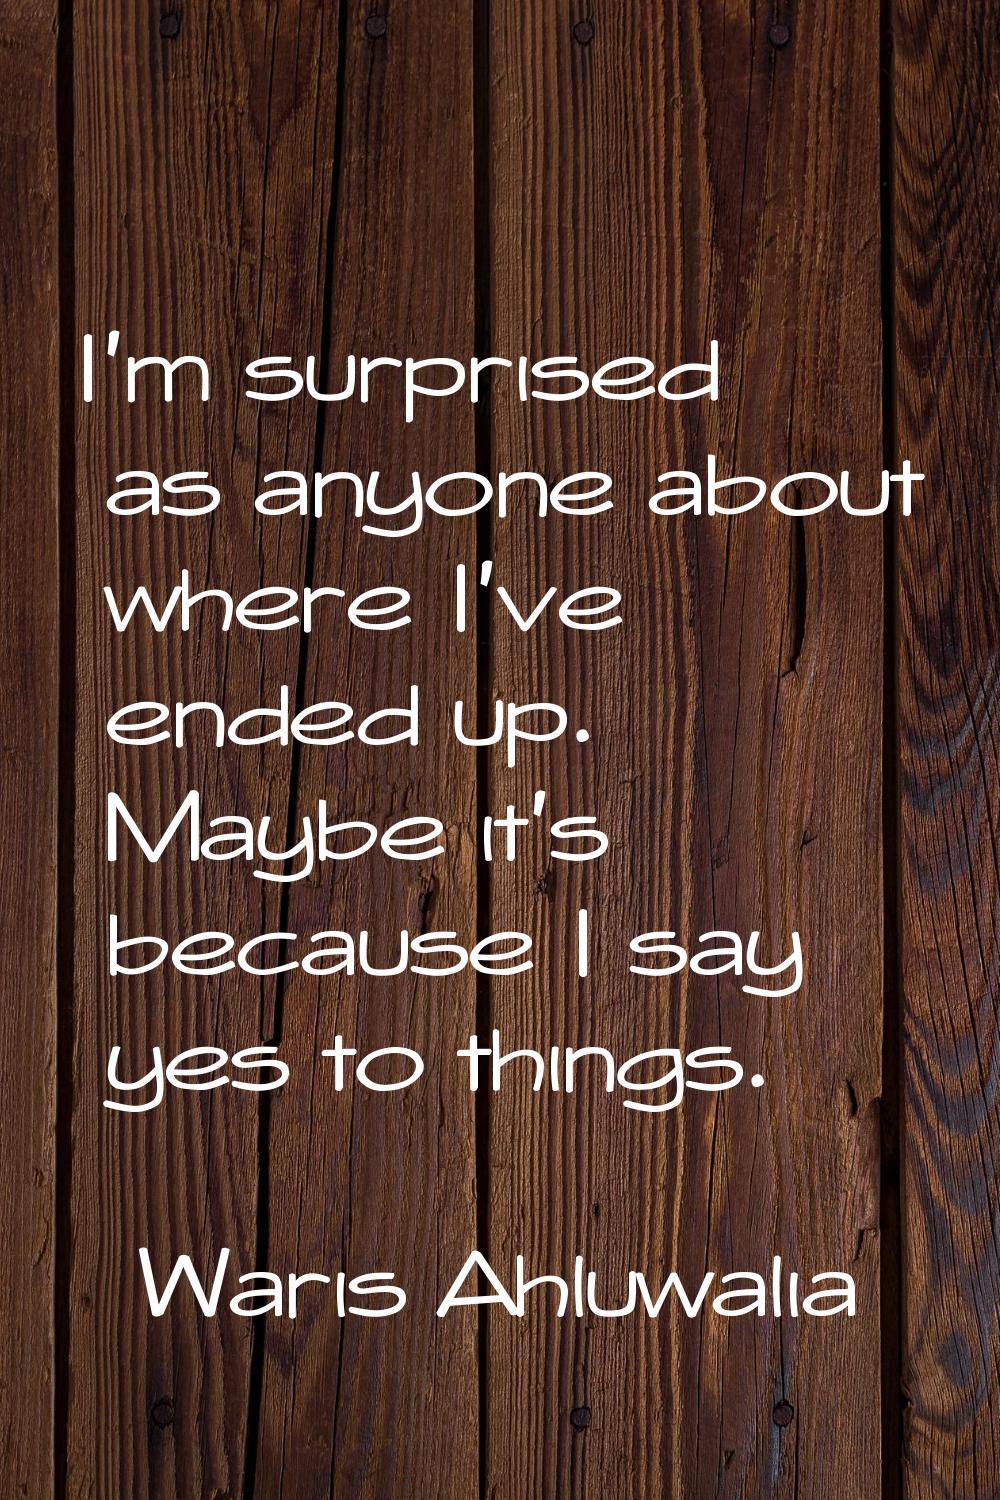 I'm surprised as anyone about where I've ended up. Maybe it's because I say yes to things.